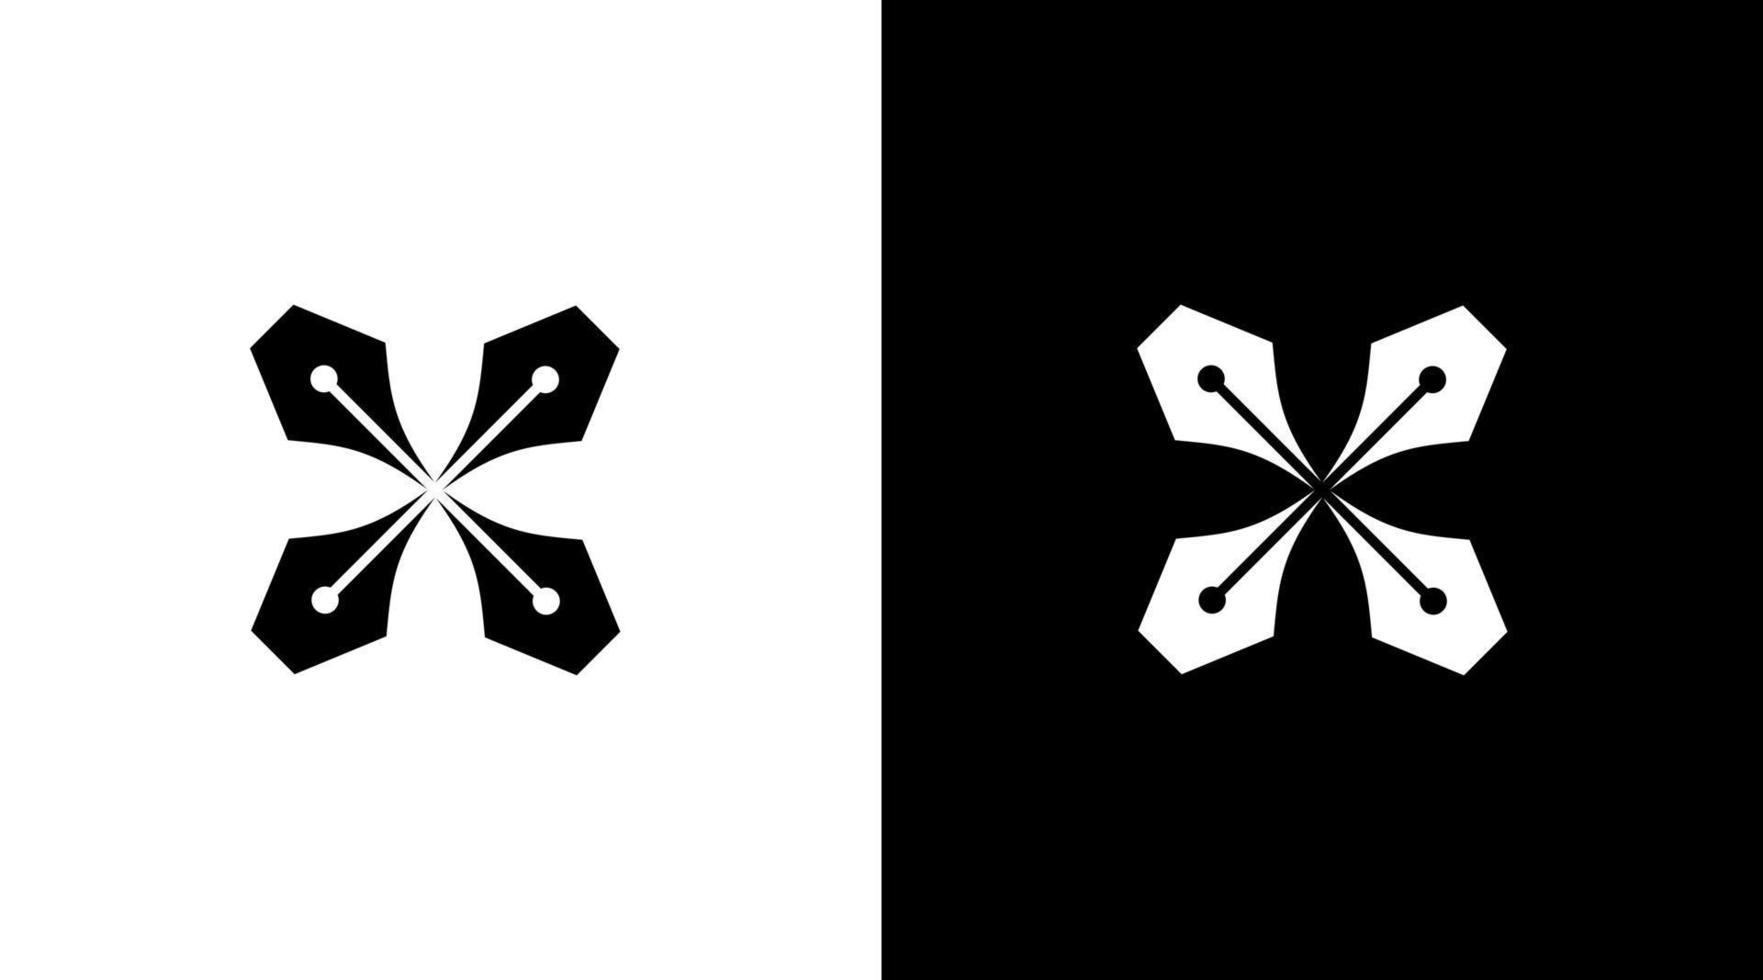 pen and cross logo vector black and white icon style Design template